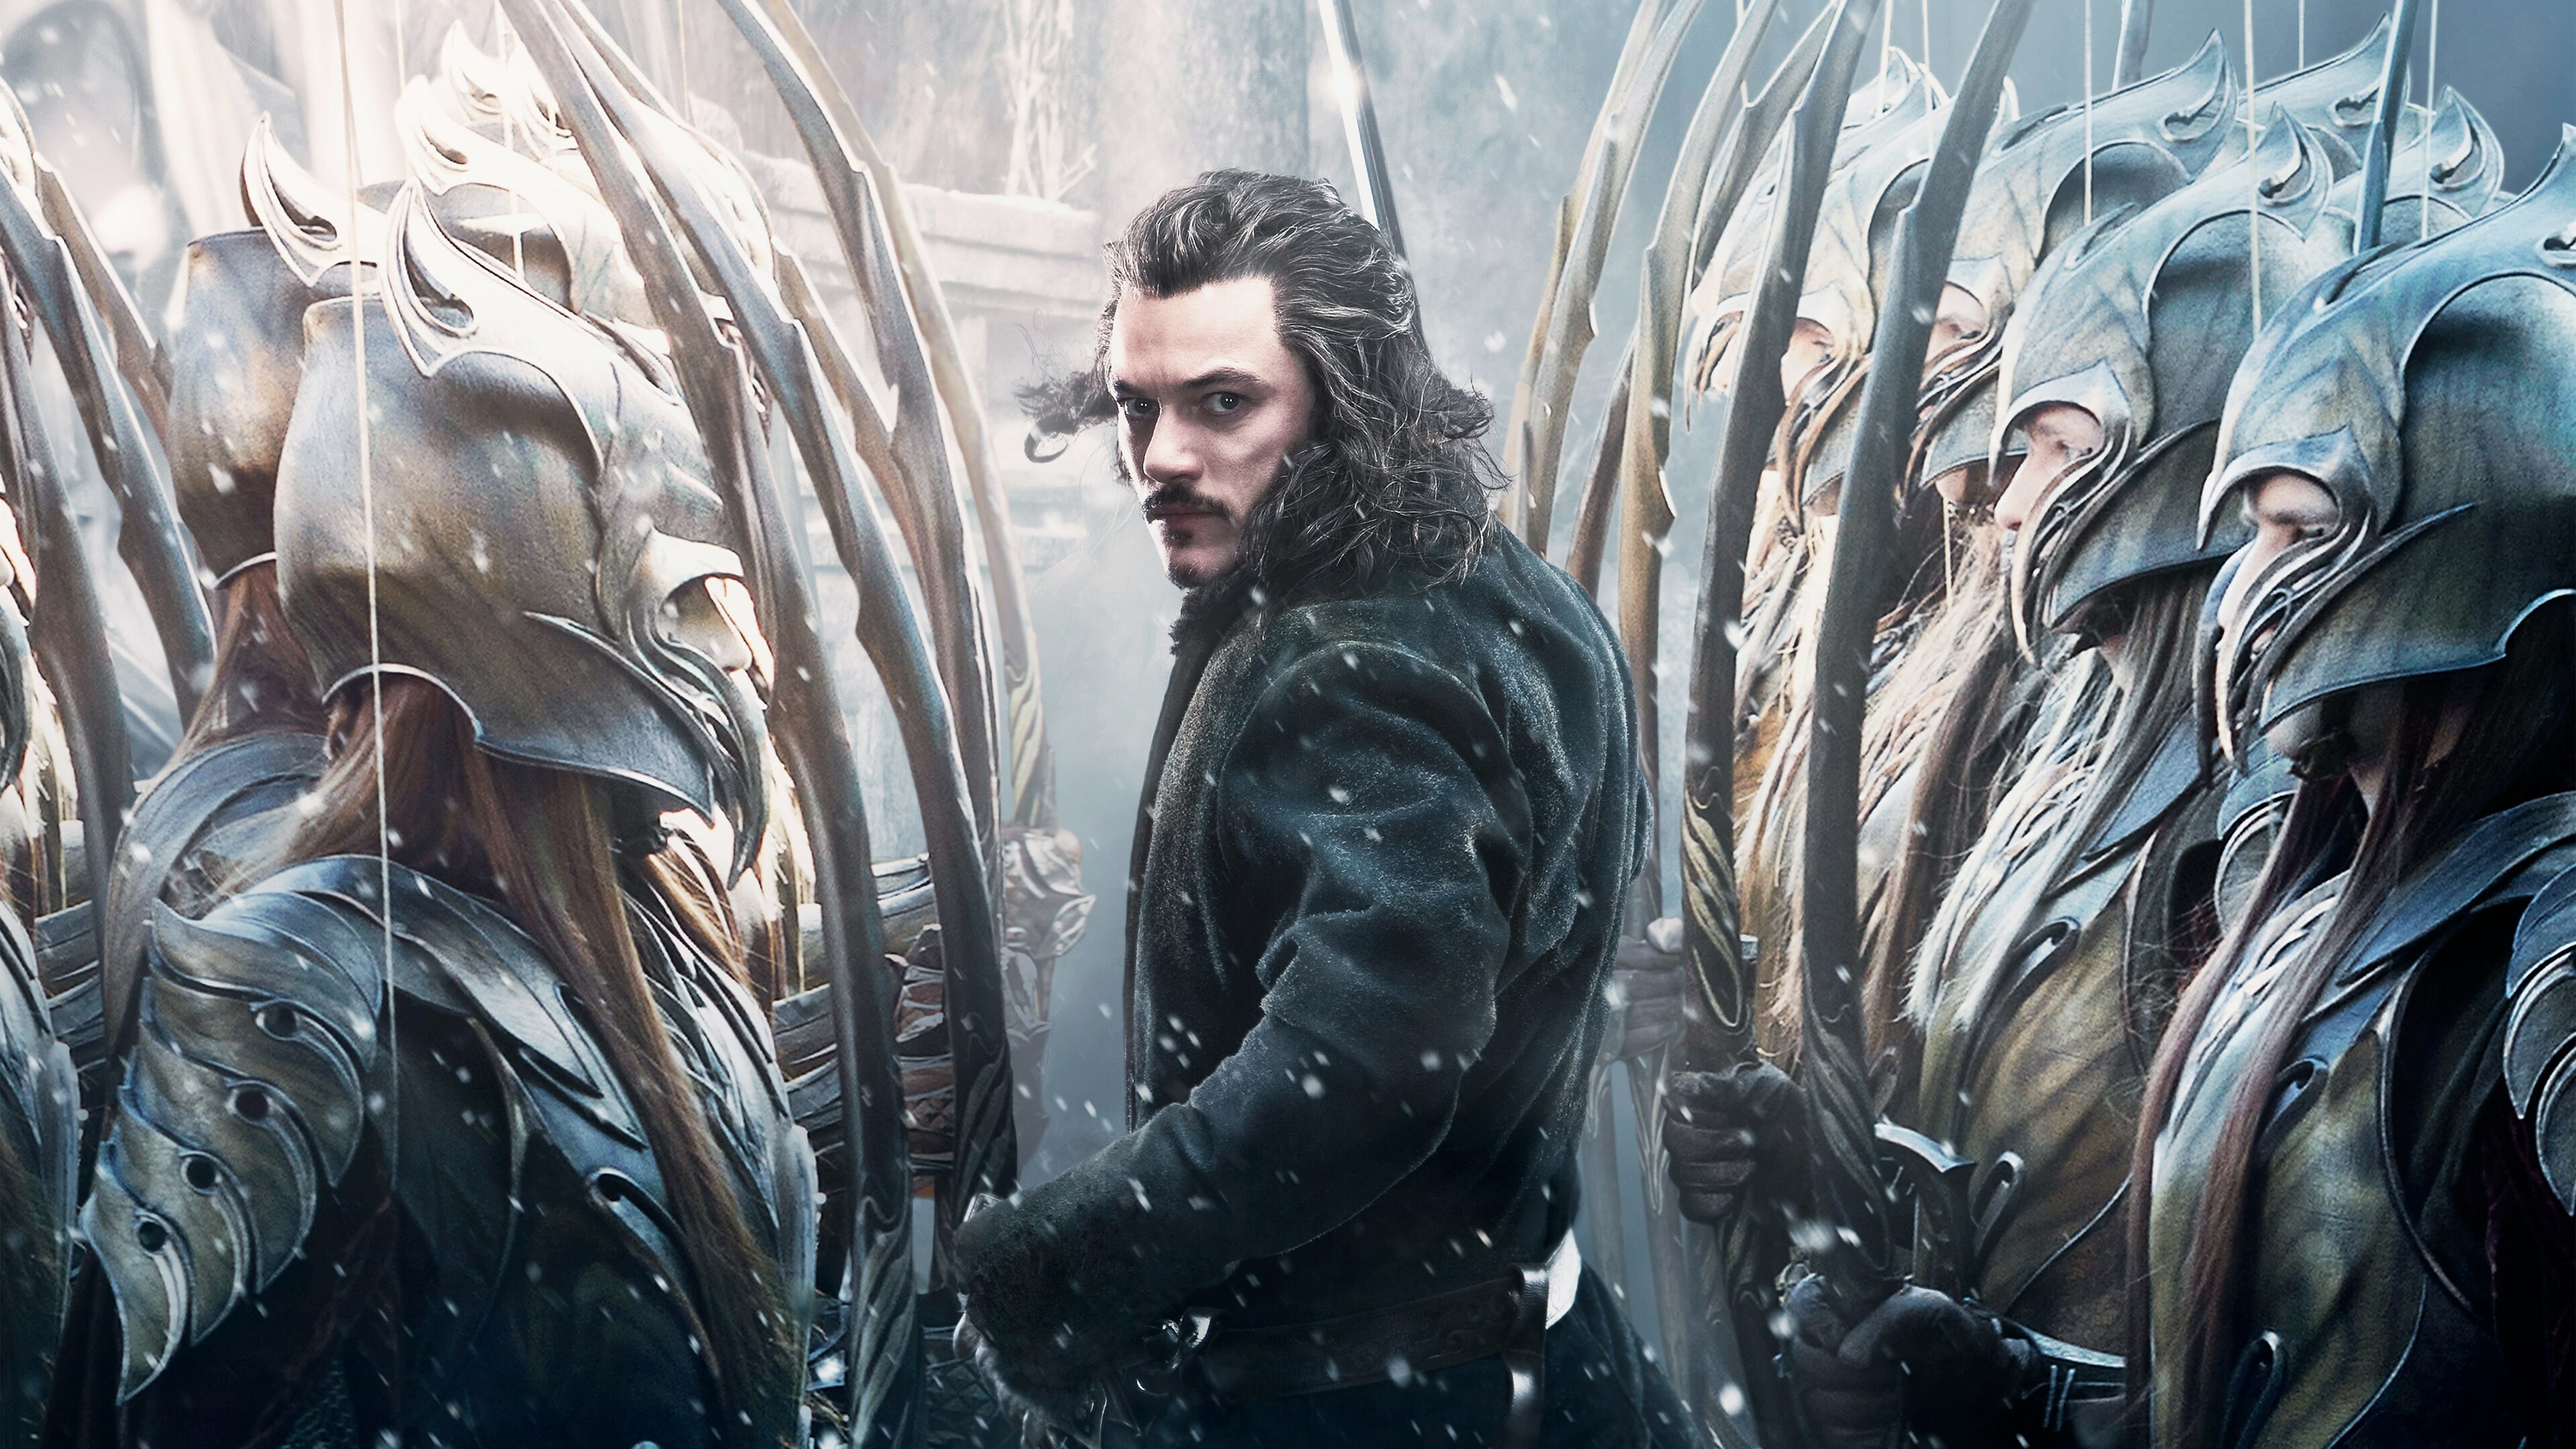 The Hobbit: Luke Evans as Bard the Bowman, A Man of Laketown and a descendant of the ancient Lords of Dale. 3840x2160 4K Wallpaper.